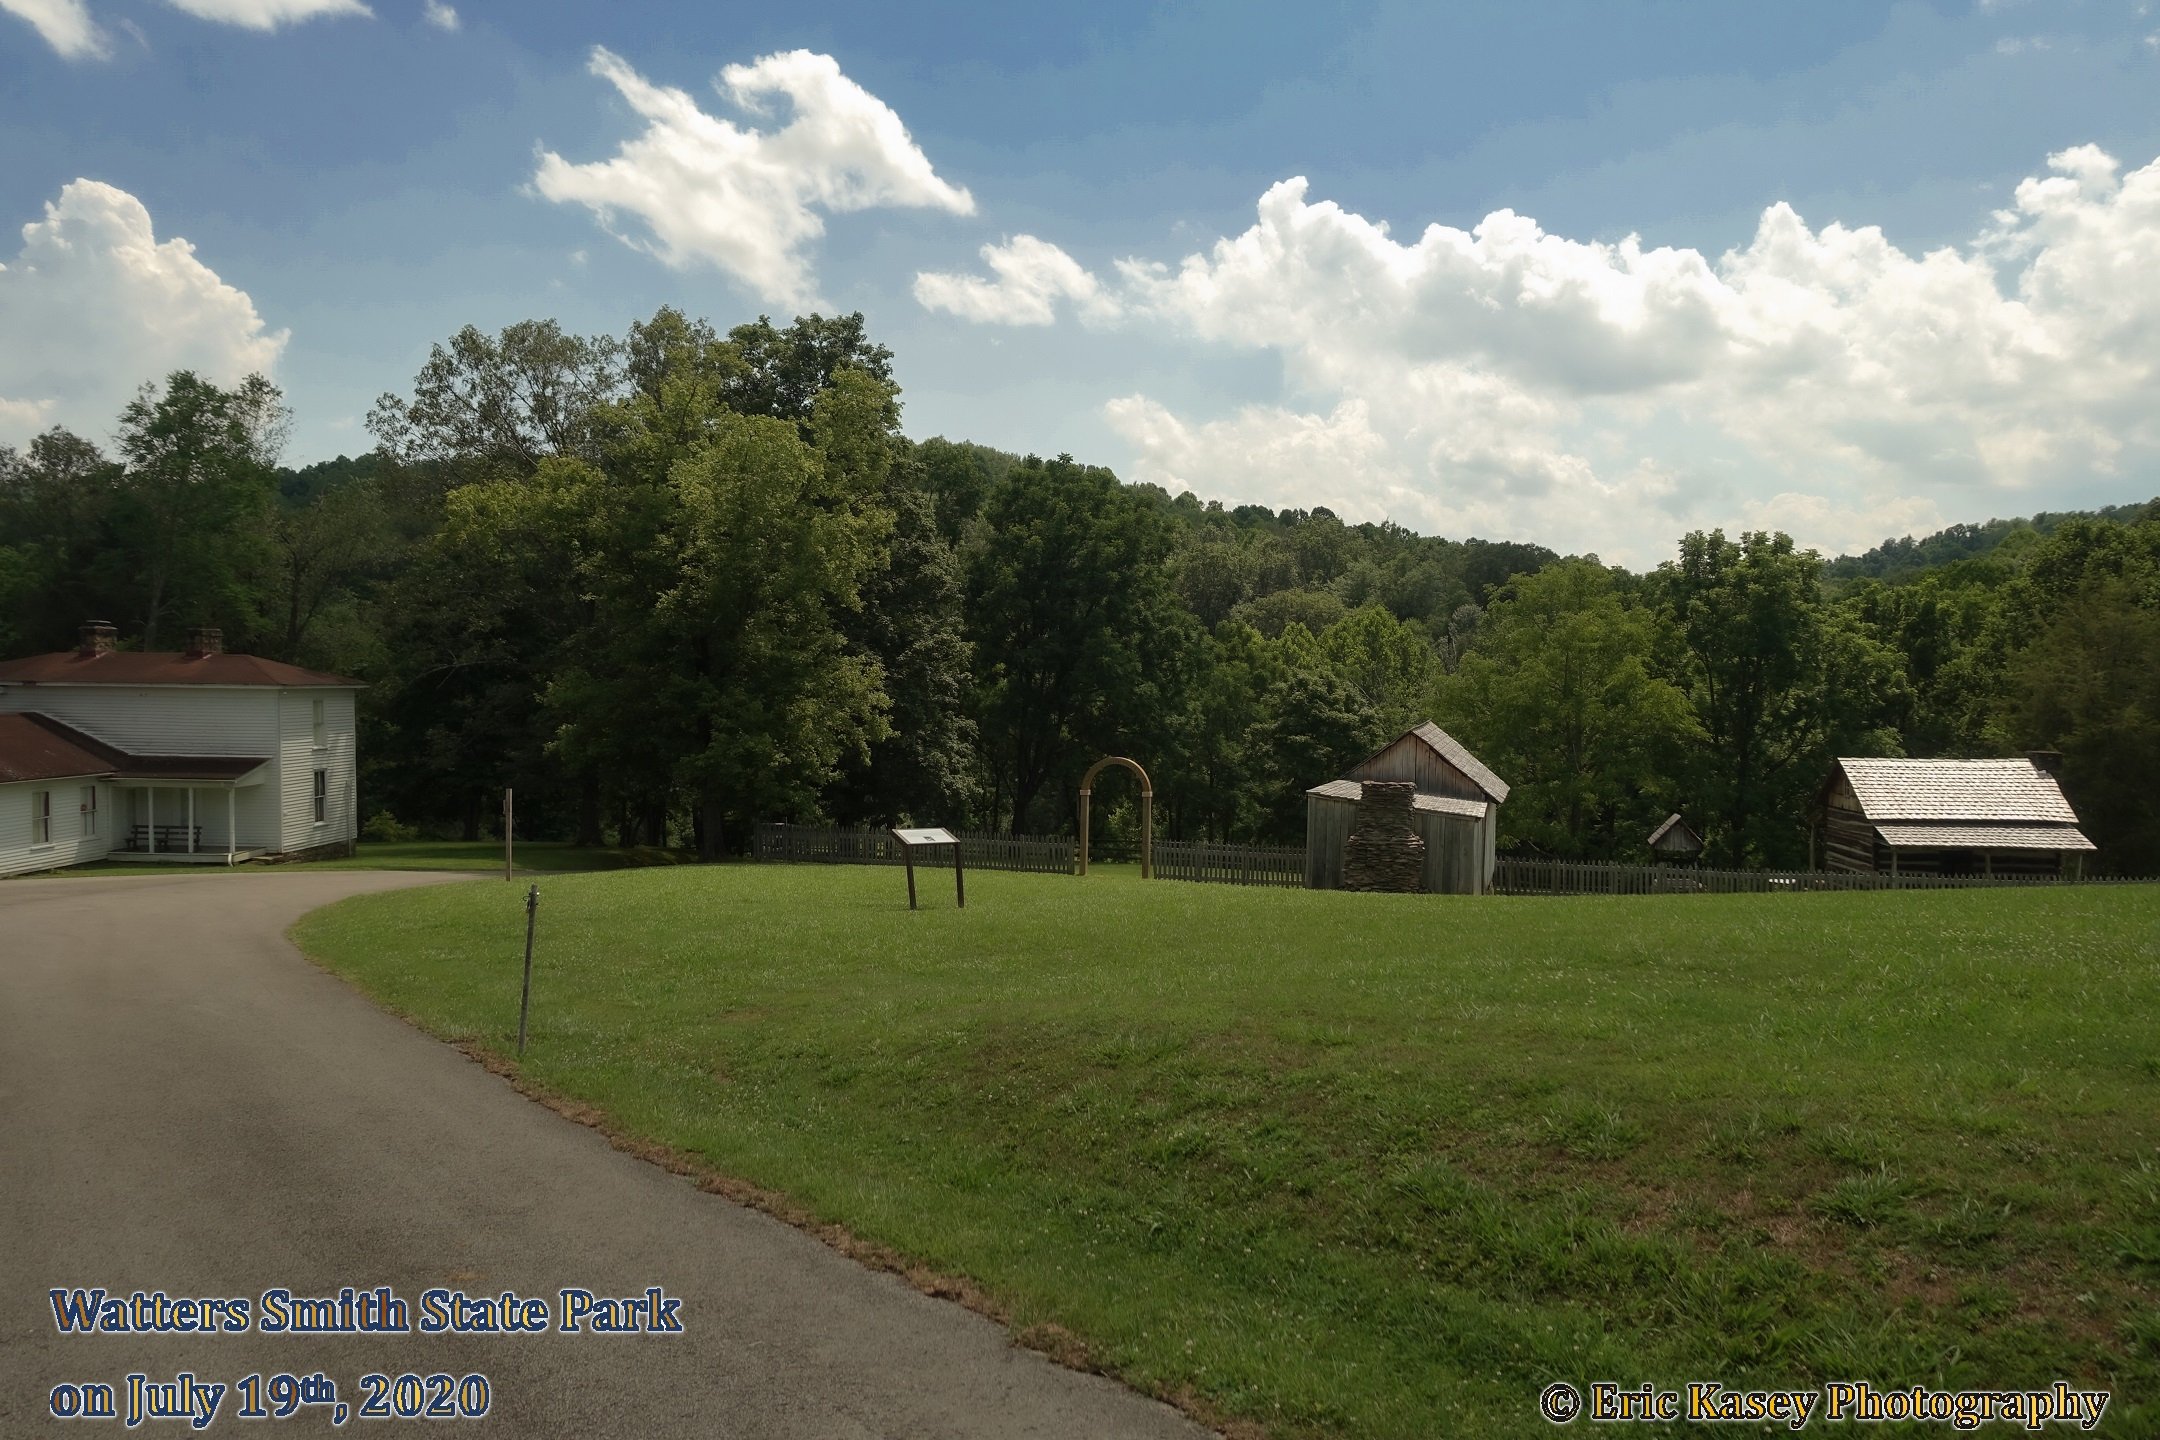 41 - Watters Smith State Park on July 19th, 2020.JPG